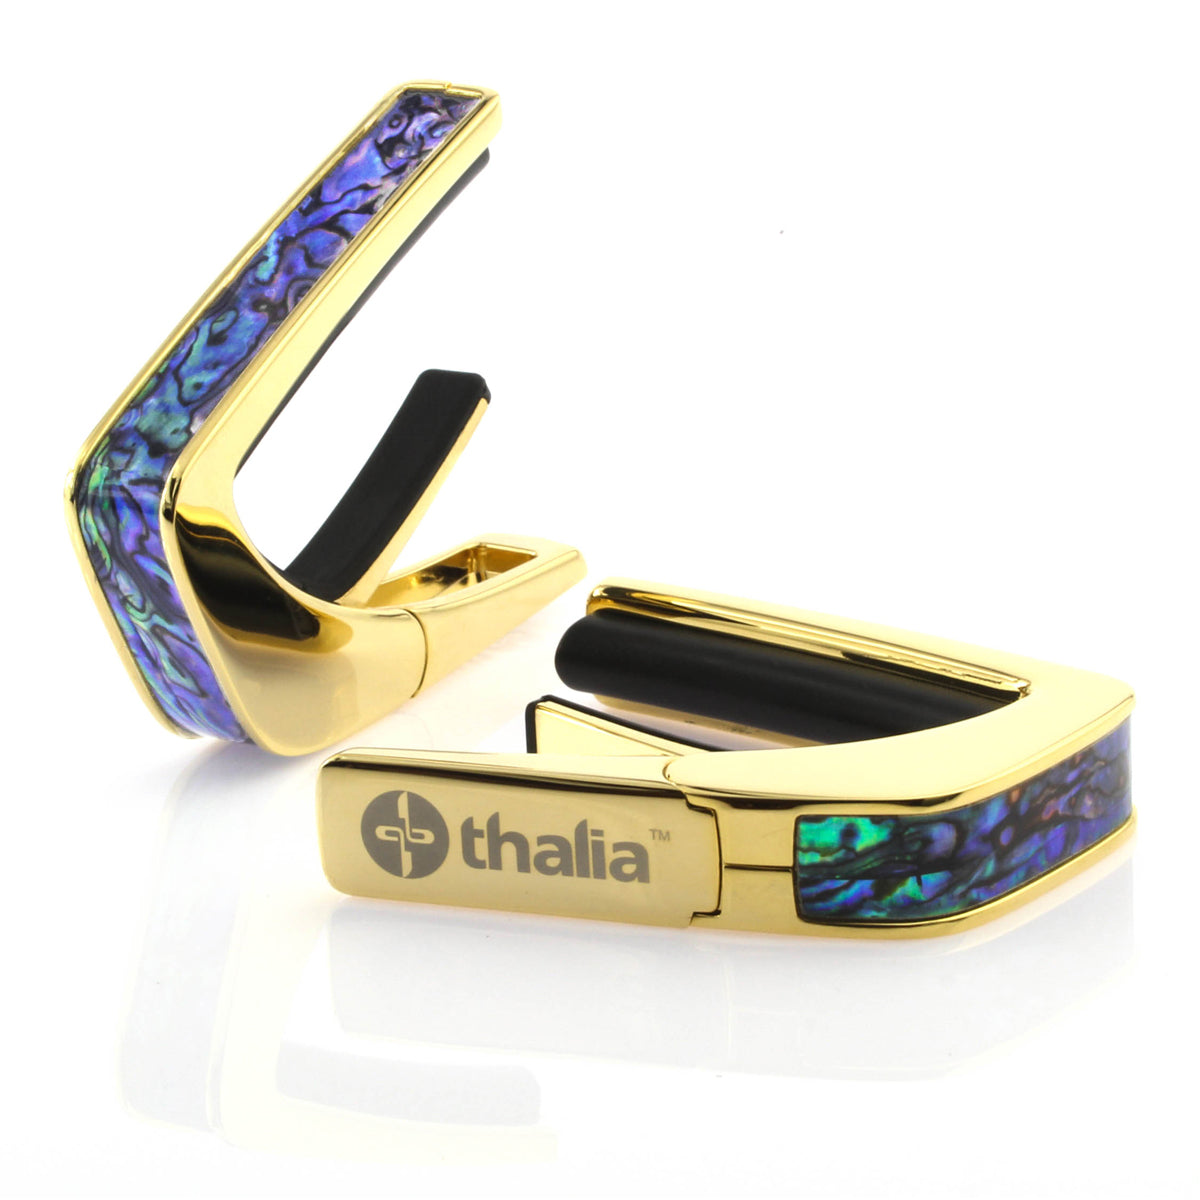 Thalia Exotic Series Shell Collection Capo ~ Gold with Blue Abalone Inlay